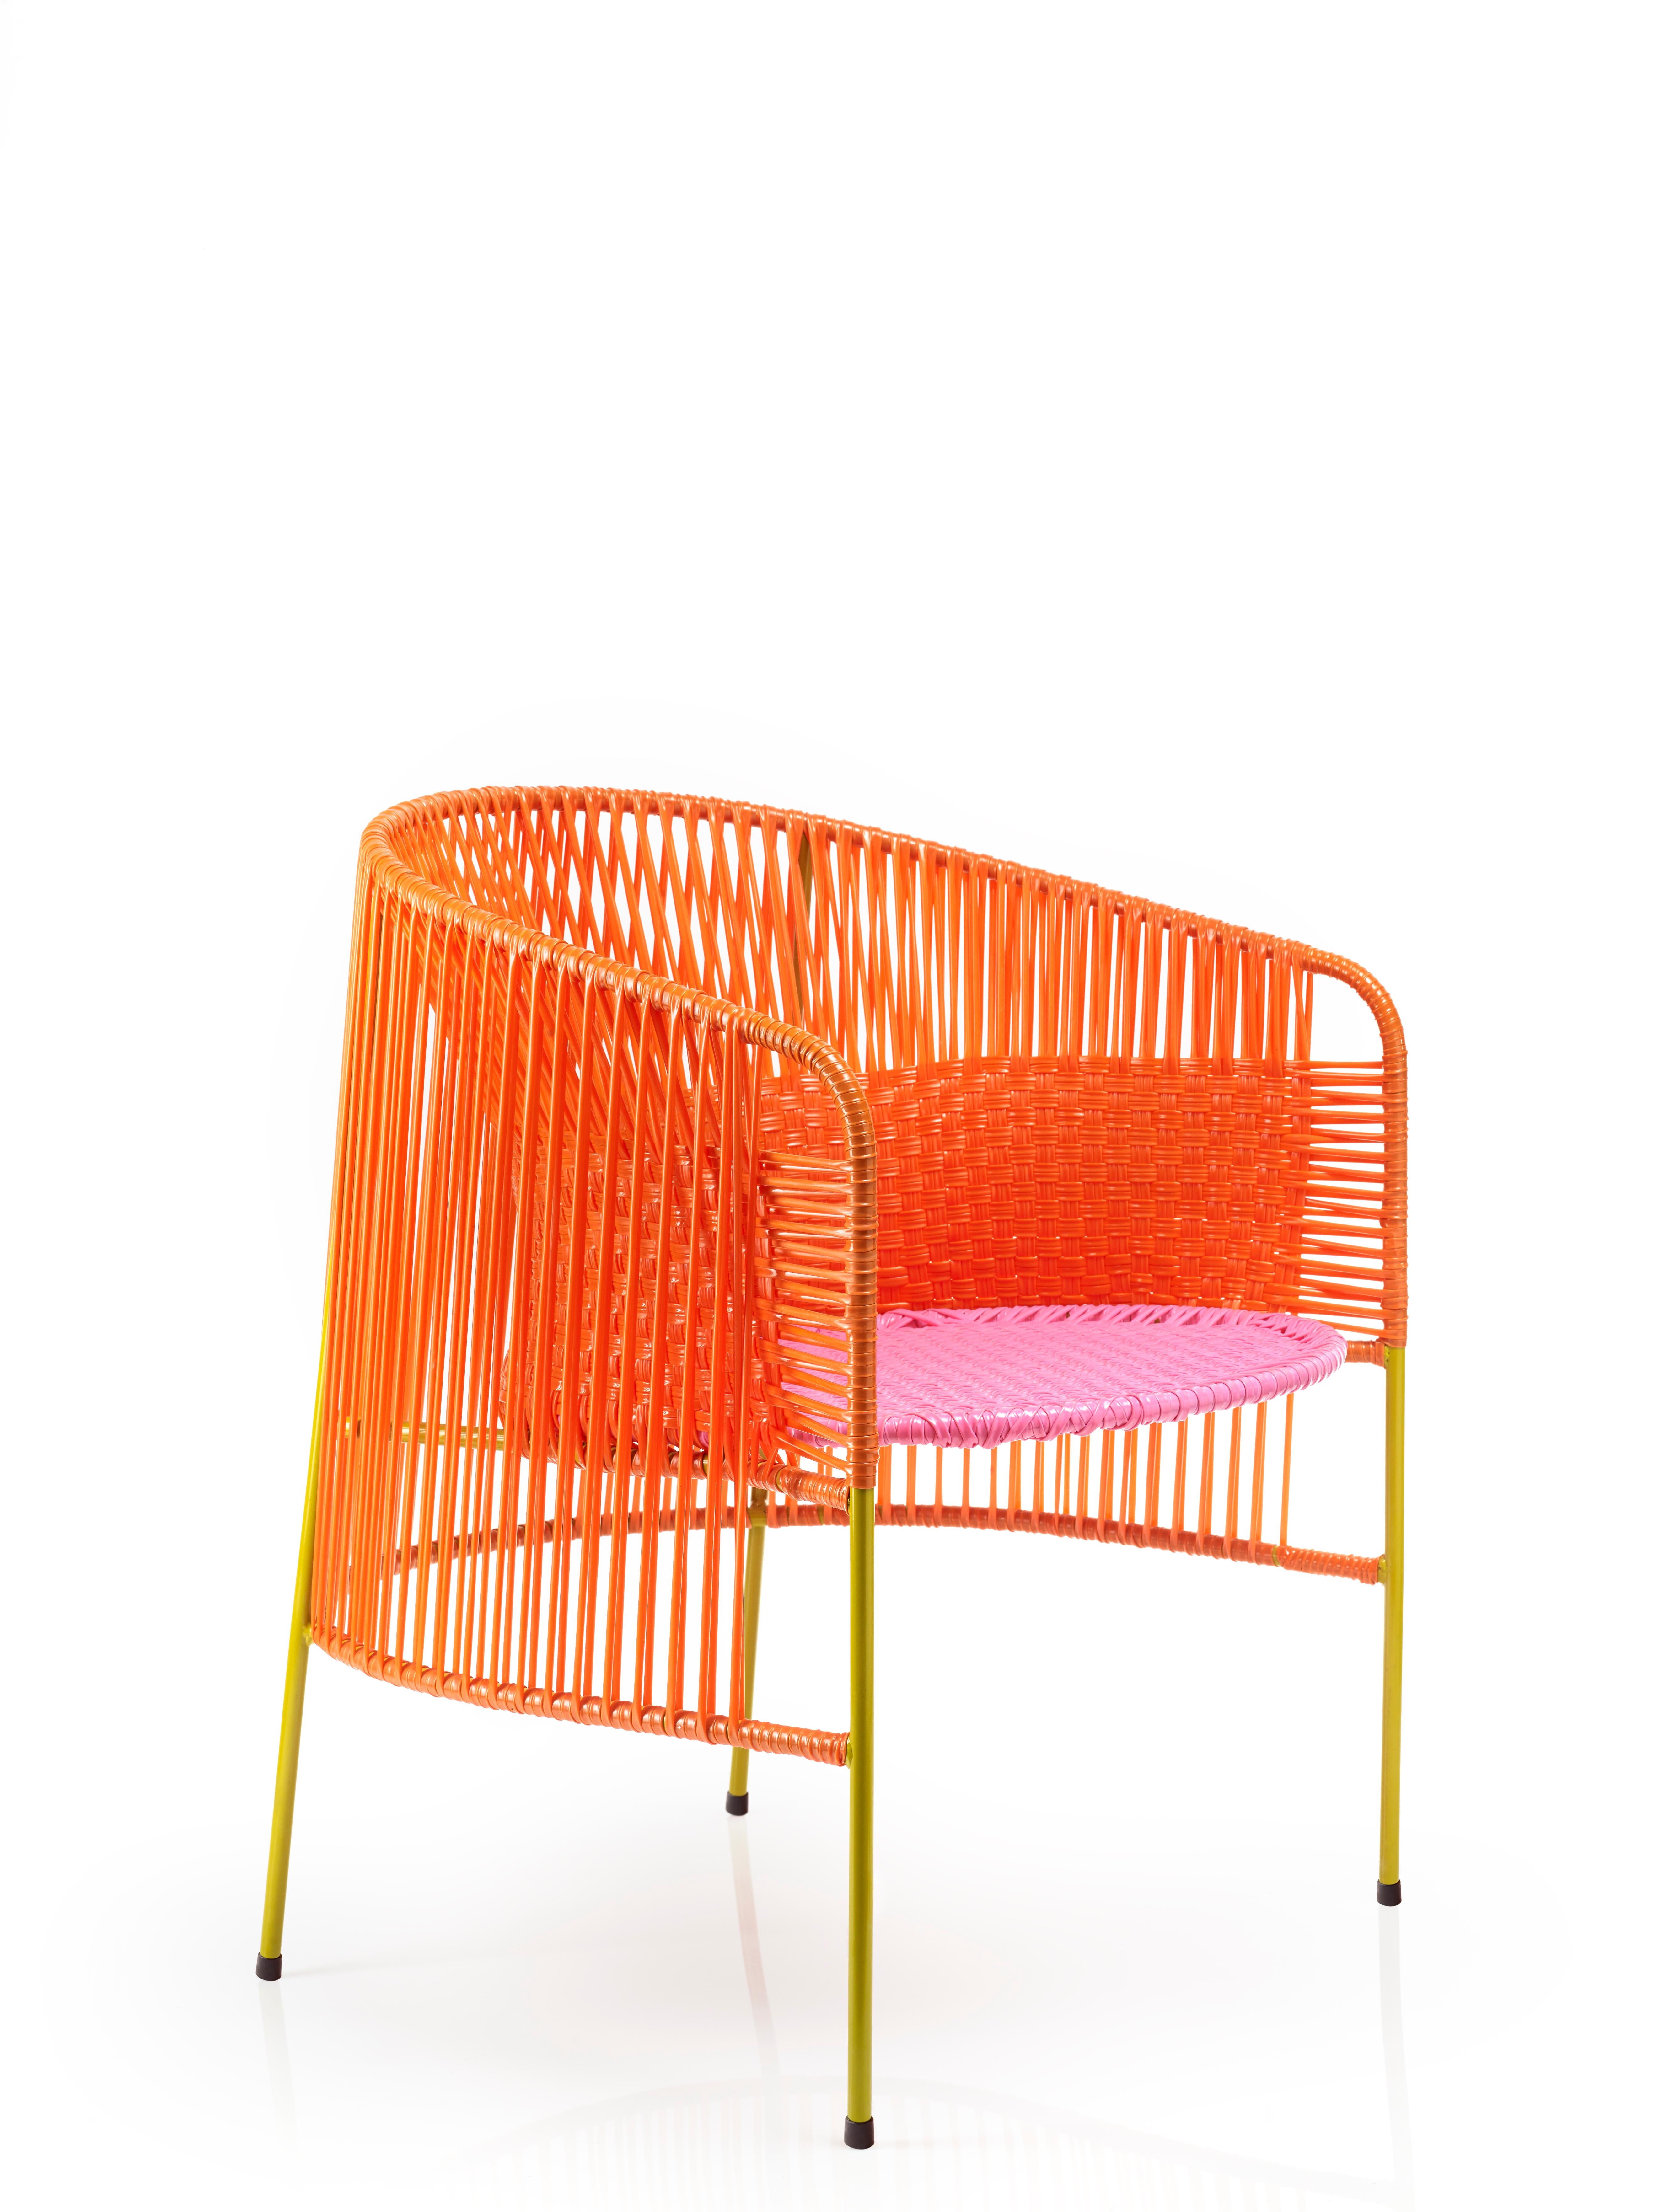 Set of 4 orange rose Caribe lounge chair by Sebastian Herkner
Materials: Galvanized and powder-coated tubular steel. PVC strings are made from recycled plastic.
Technique: Made from recycled plastic and weaved by local craftspeople in Colombia.